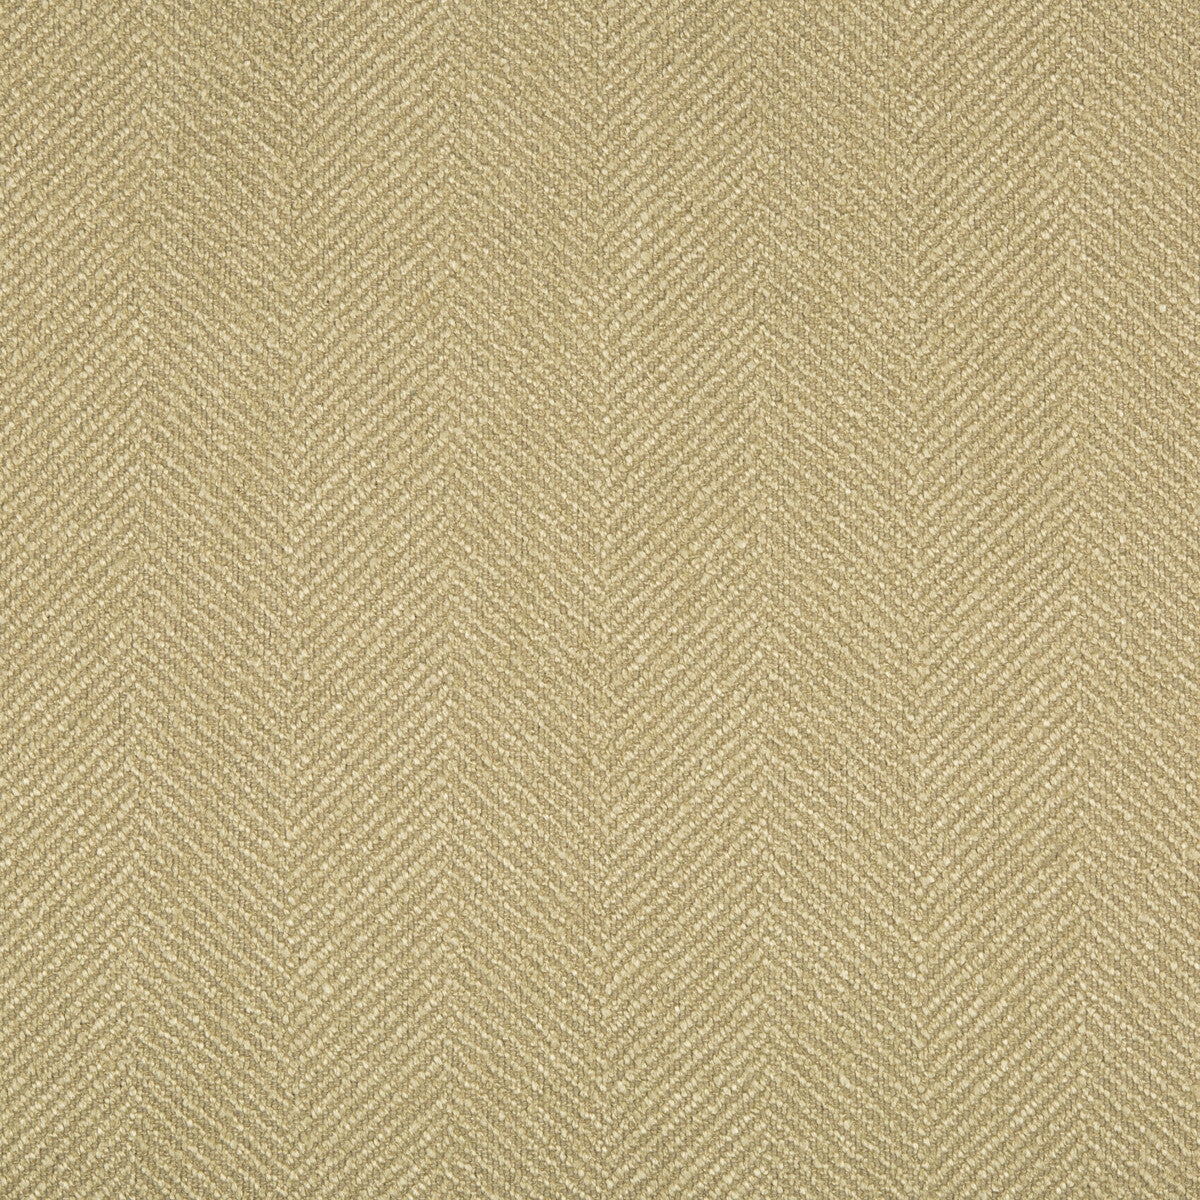 Kravet Smart fabric in 34631-16 color - pattern 34631.16.0 - by Kravet Smart in the Performance Crypton Home collection